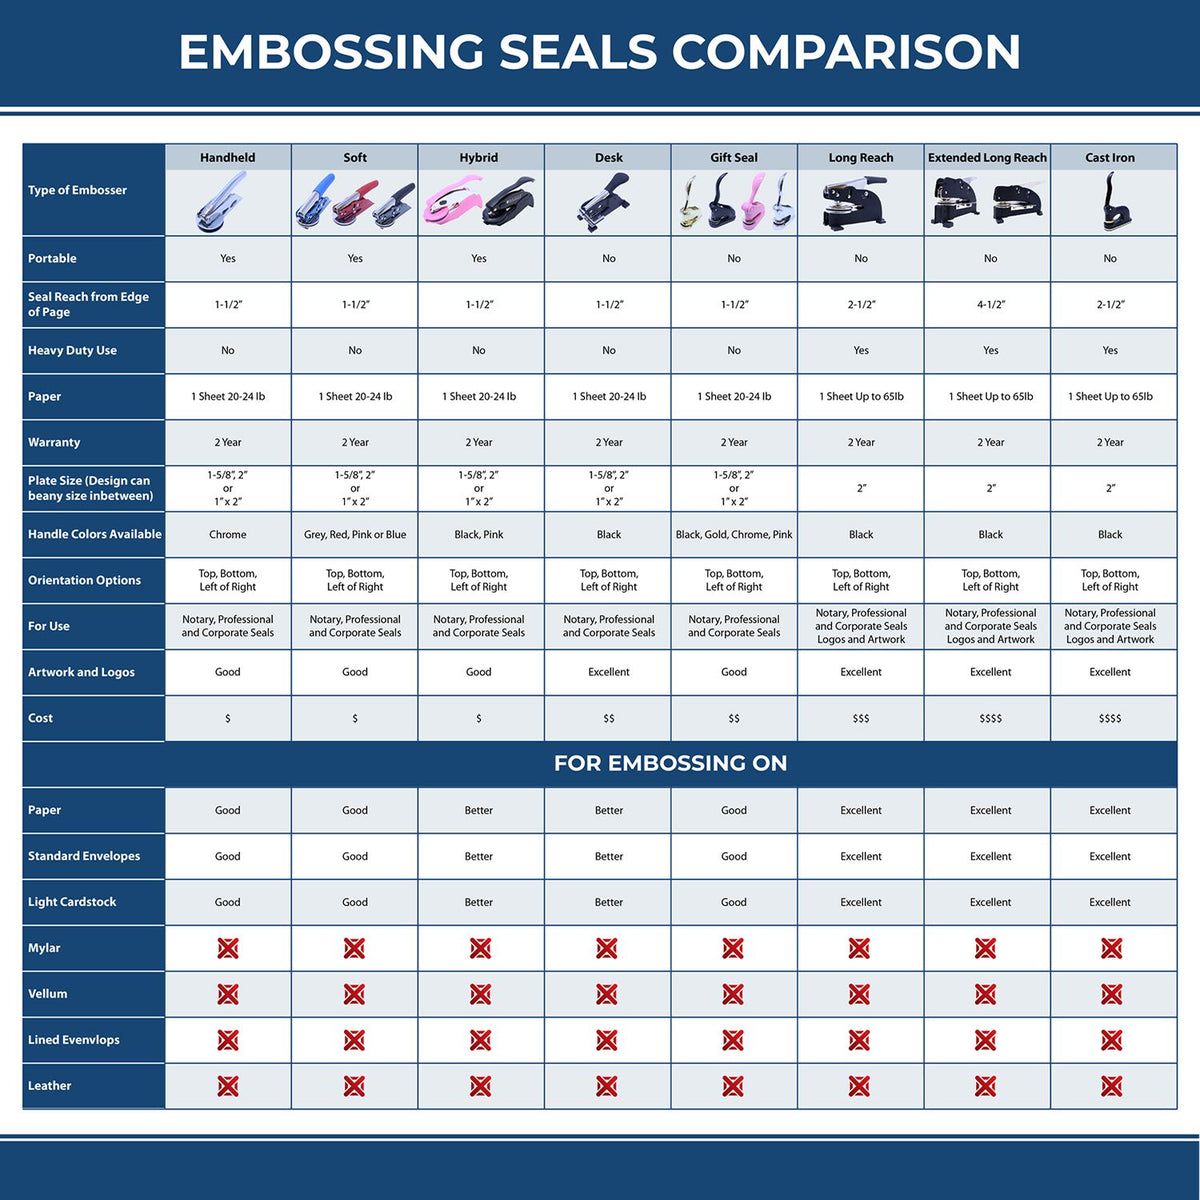 A comparison chart for the different types of mount models available for the Hybrid Louisiana Engineer Seal